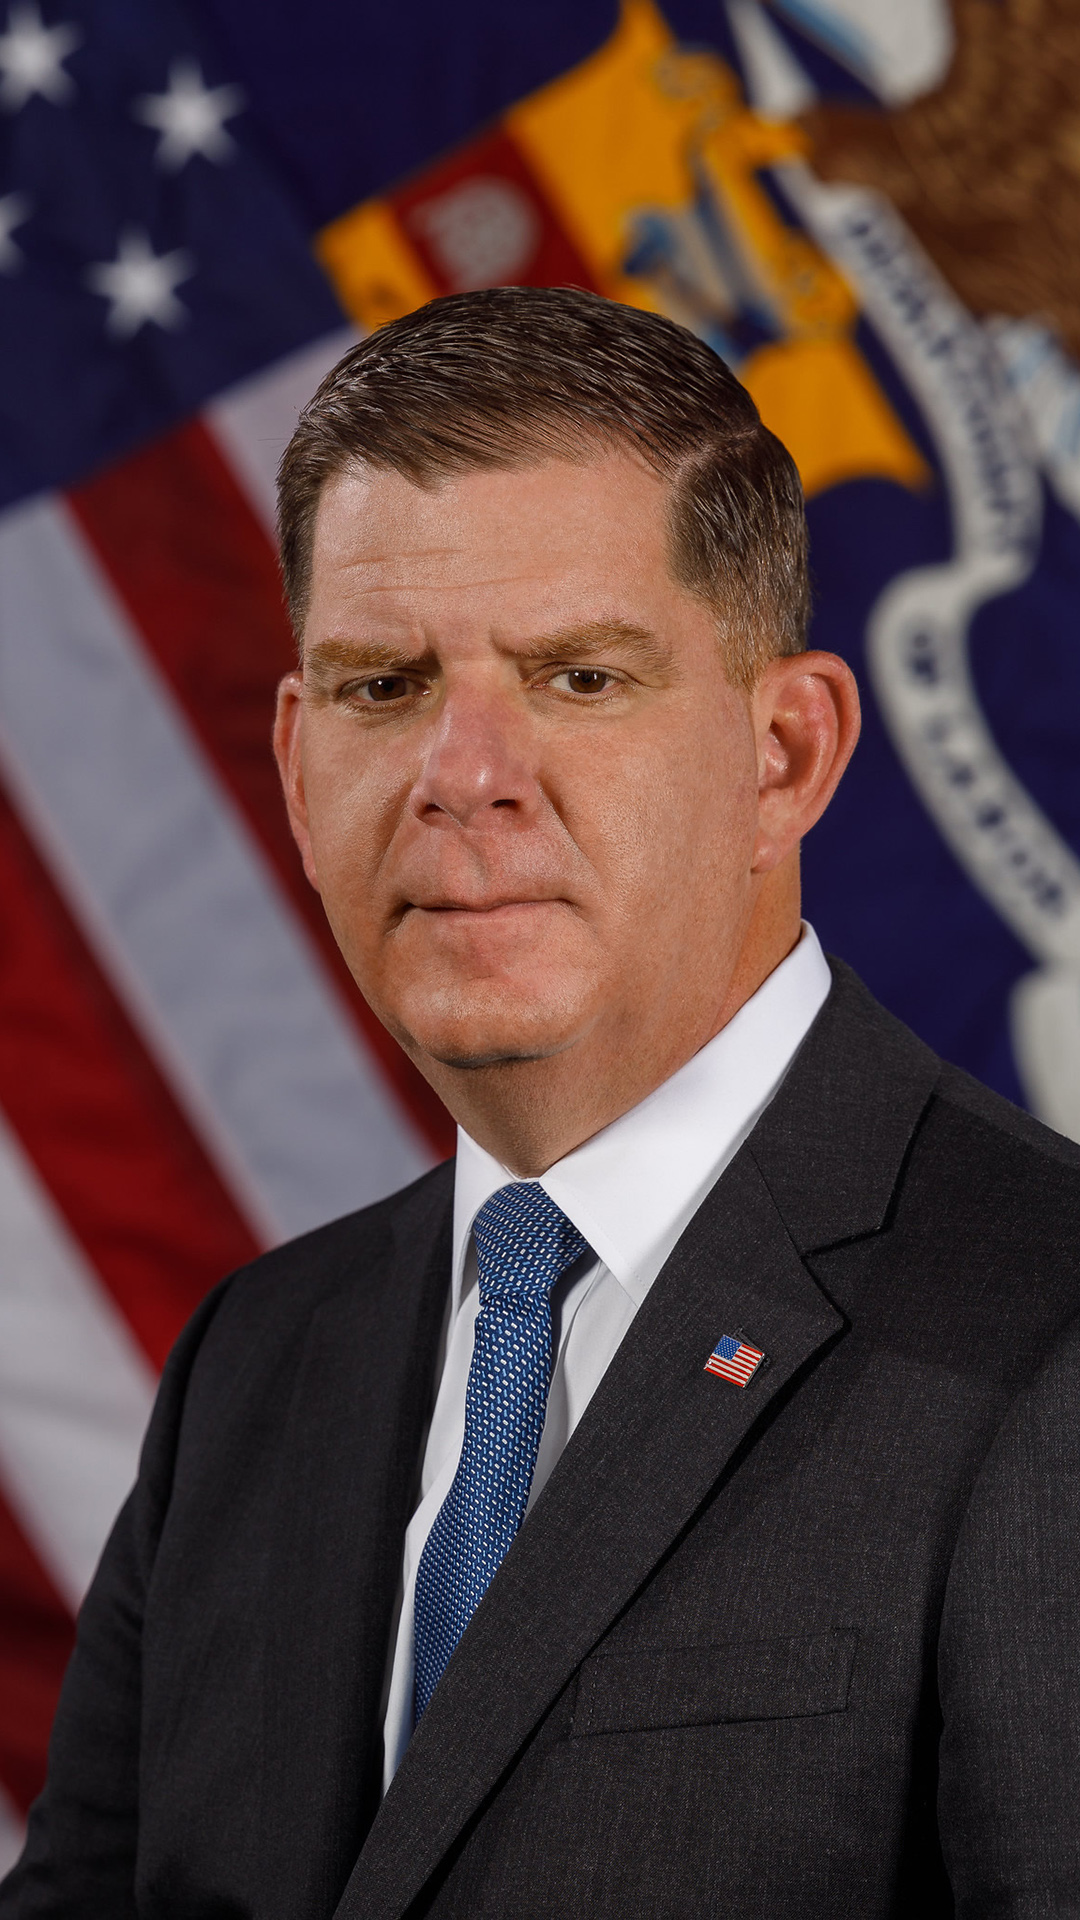 An official portrait of U.S. Secretary of Labor Marty Walsh